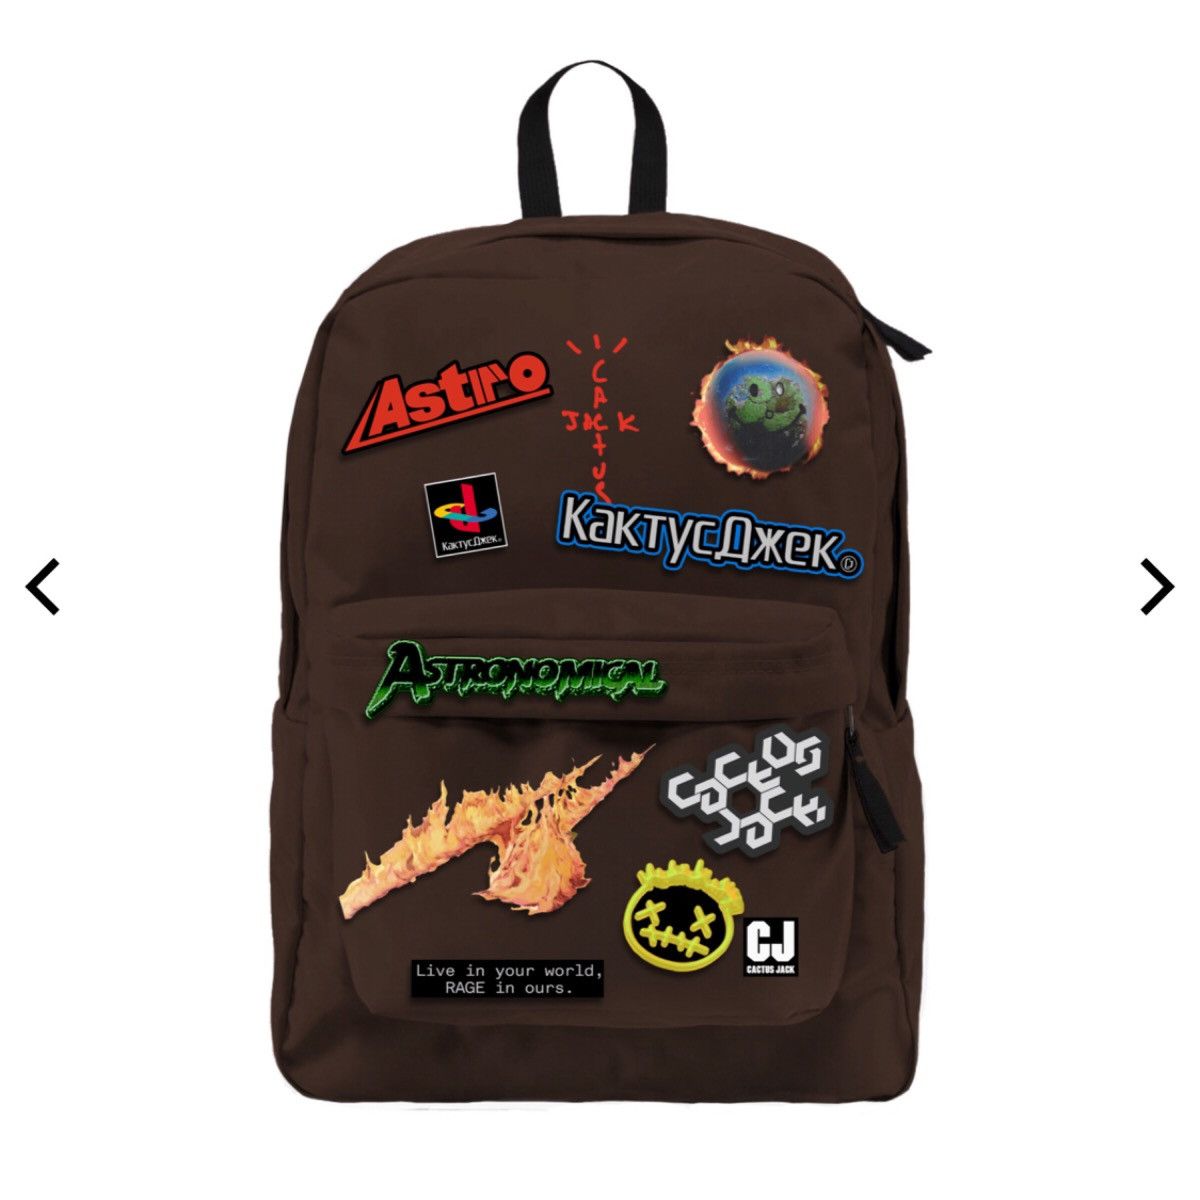 Travis Scott backpack just came in. Any ideas on what I should do with the  patches? Lol : r/travisscott